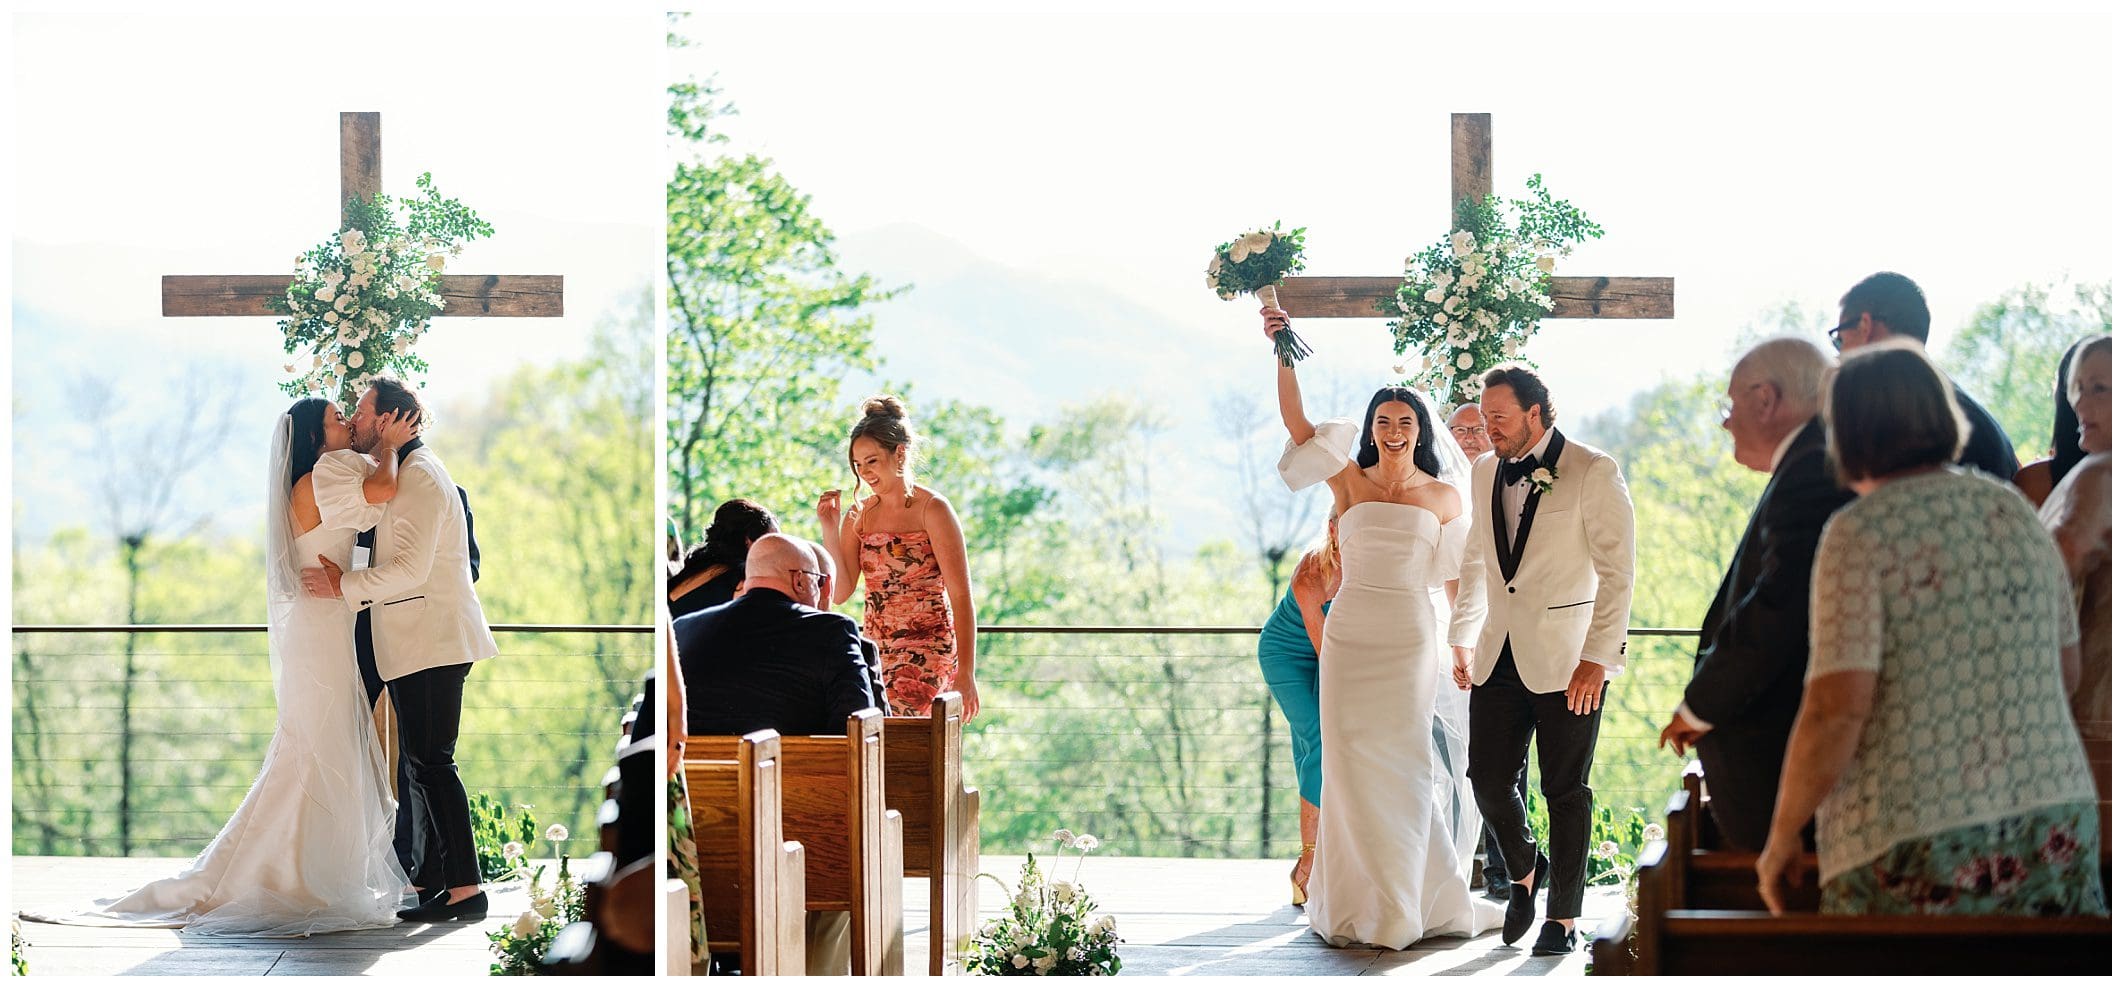 A collage of two wedding scenes: the left shows a bride and groom kissing under a floral-decorated cross, while the right depicts them joyfully walking down the aisle, guests clapping.